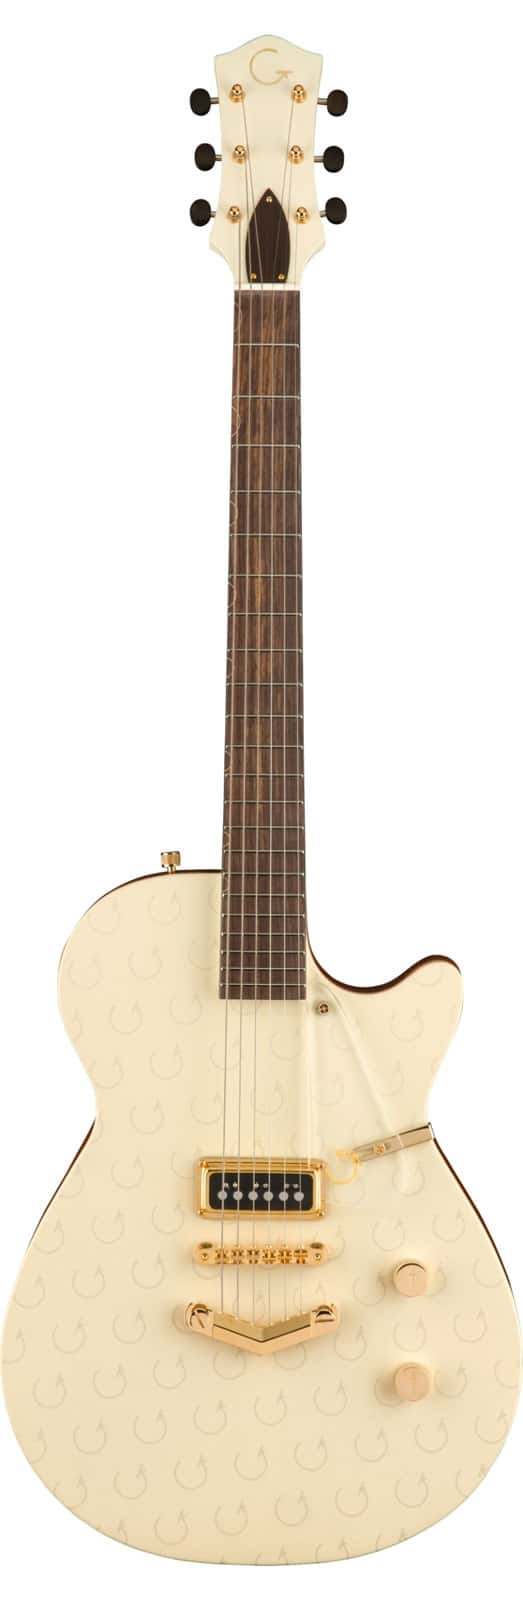 GRETSCH GUITARS G6130CS VINTAGE WHITE ROUNDUP NOS DESIGNED BY CHELSEA CLARK MASTERBUILT BY STEPHEN STERN (ONE OF A K